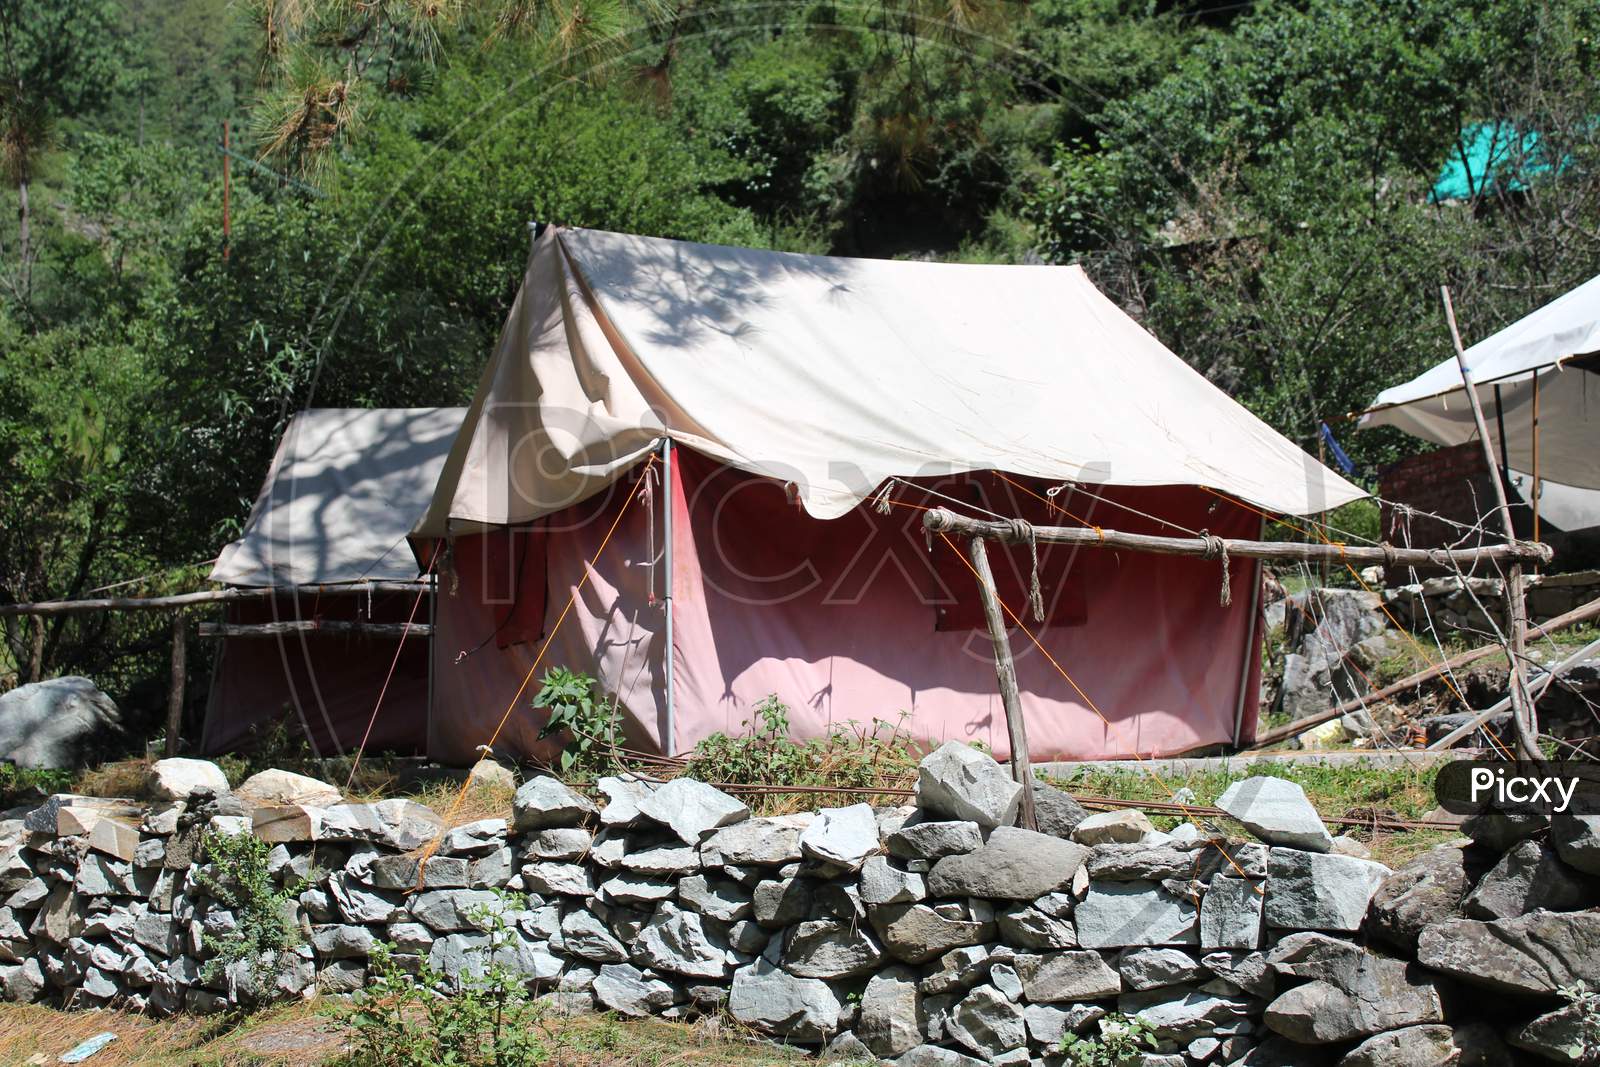 Camping in the beautiful forest in parvati valley, Himachal Pradesh